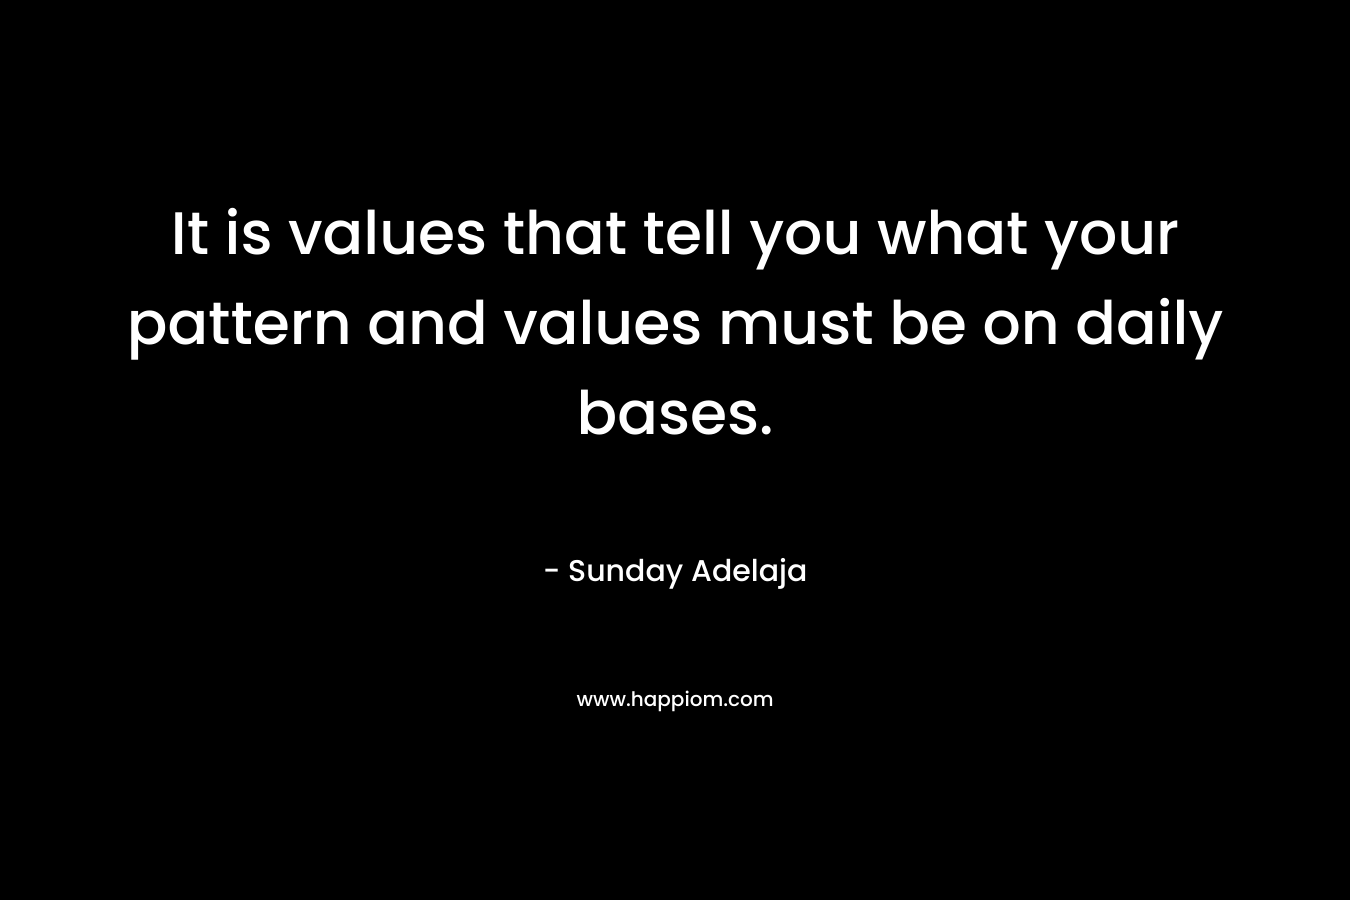 It is values that tell you what your pattern and values must be on daily bases. – Sunday Adelaja